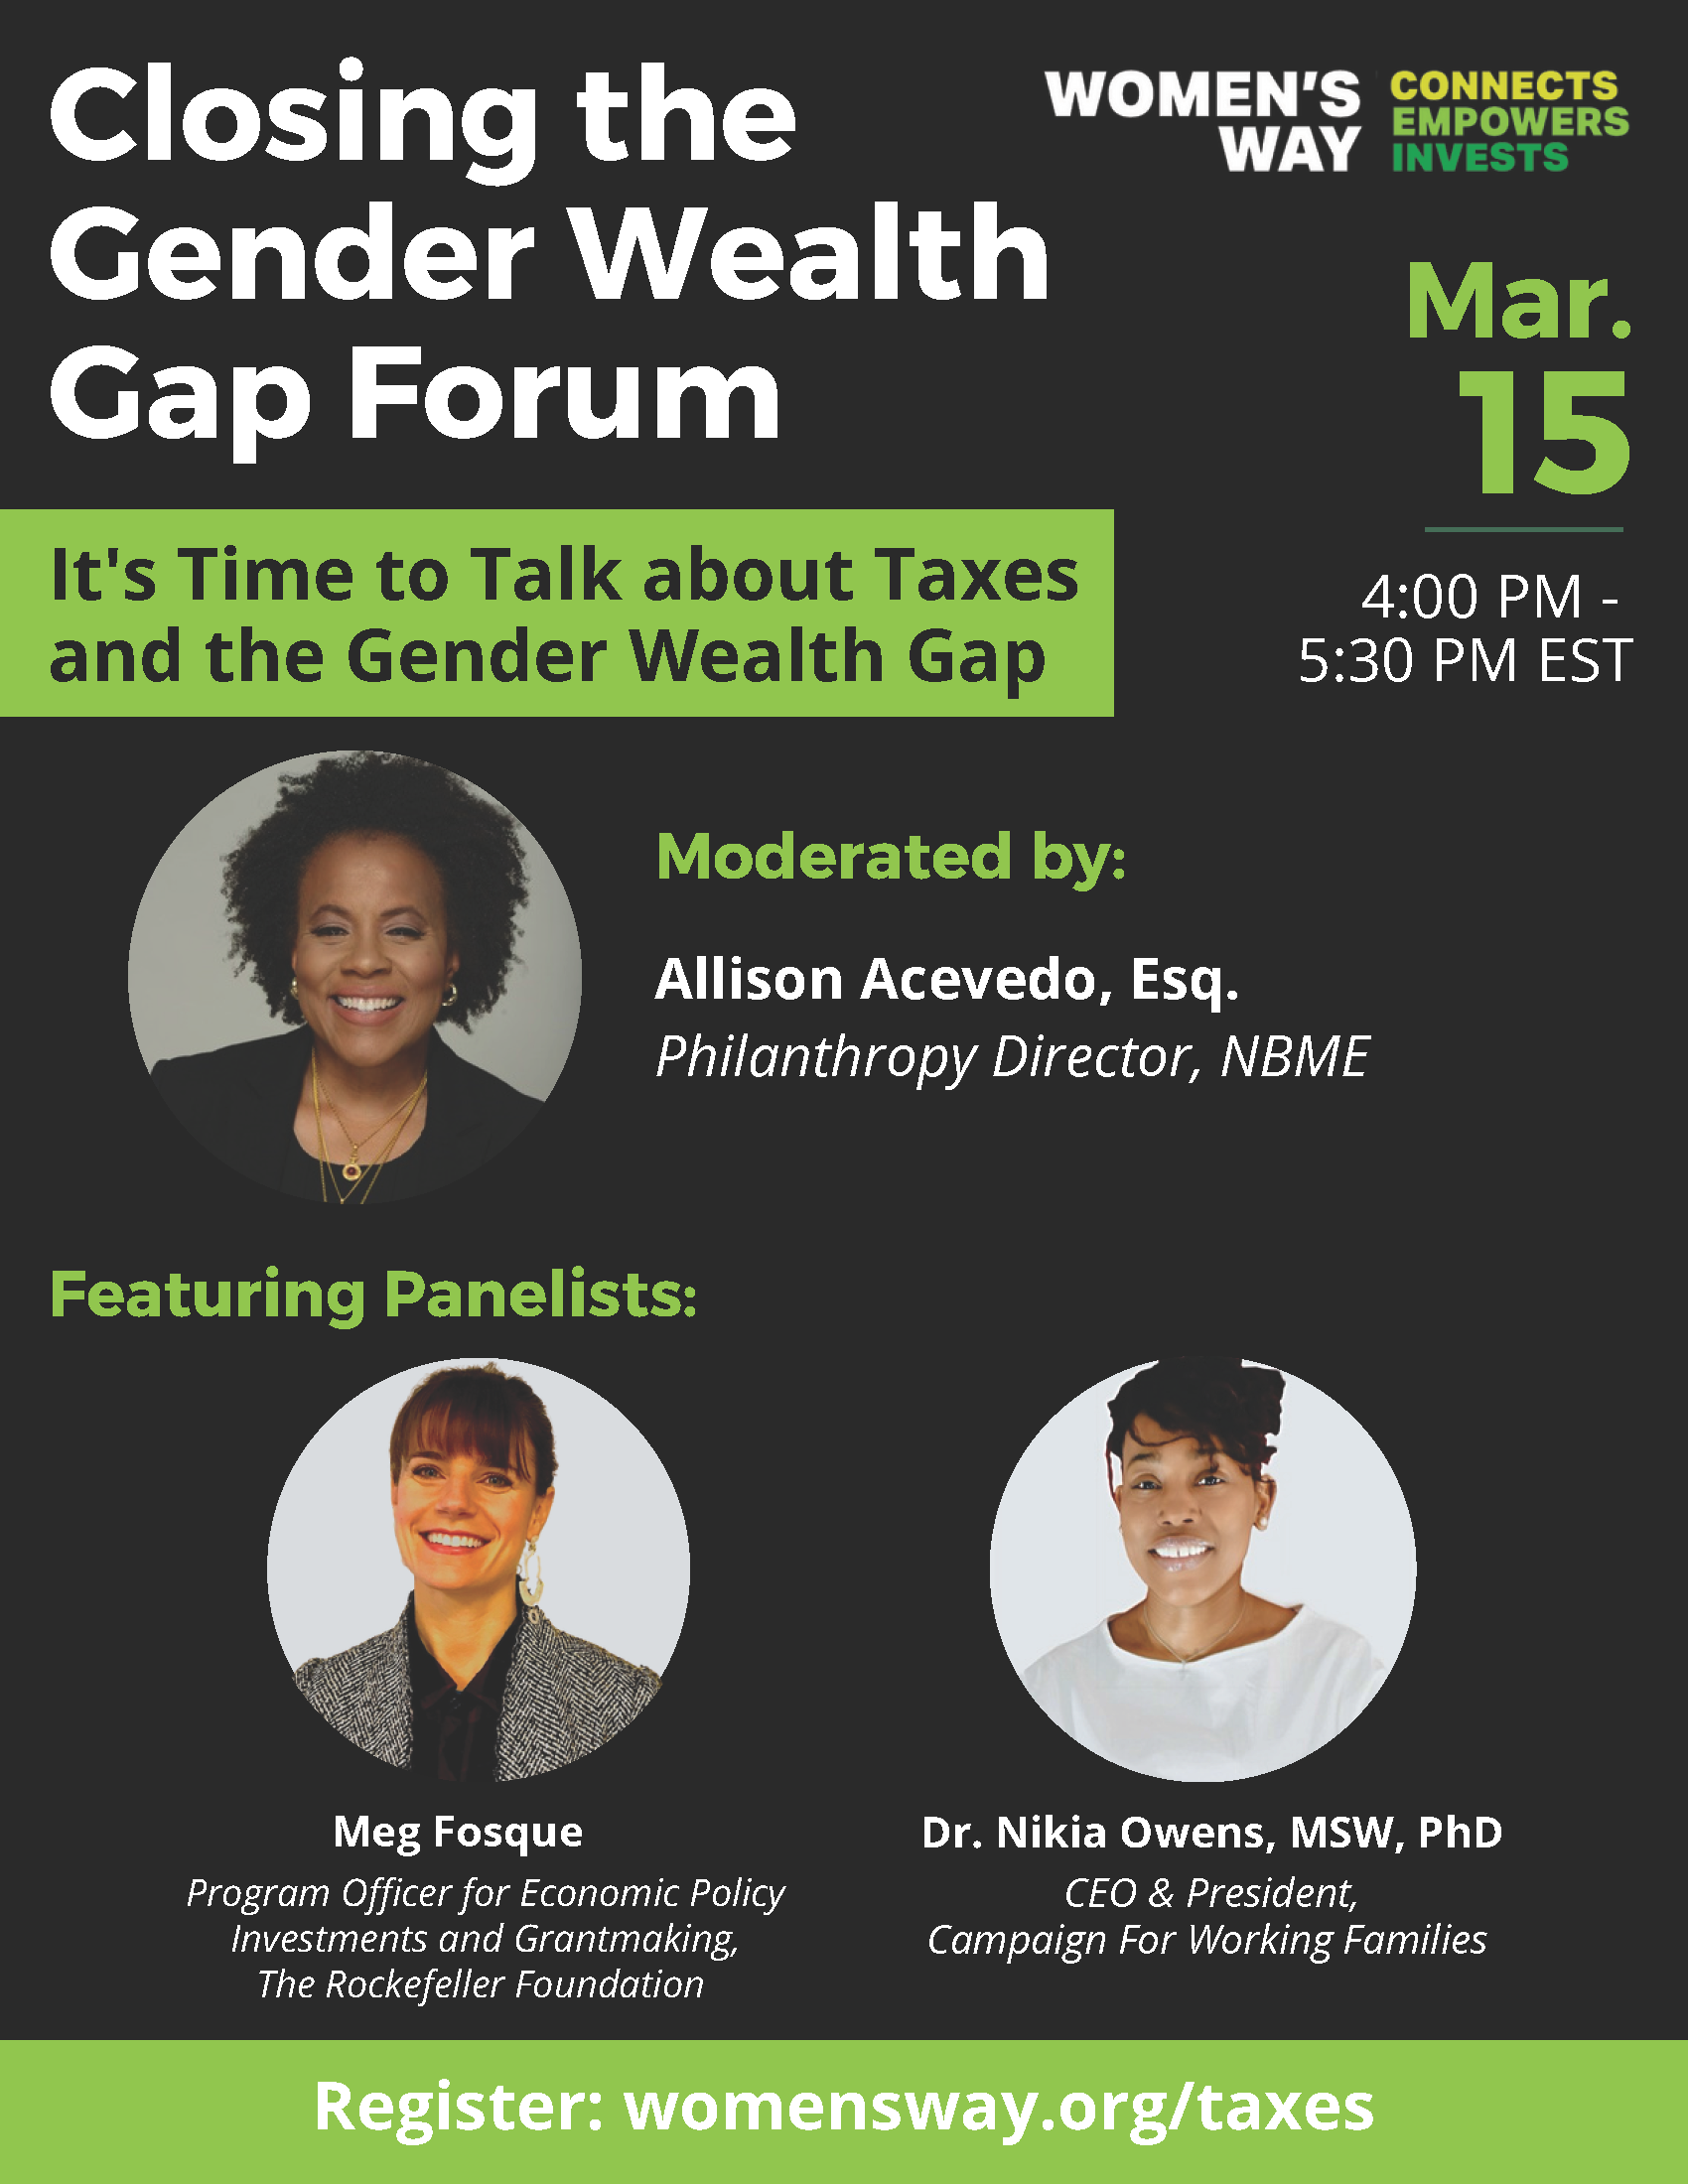 Closing the Gender Wealth Gap Forum: It’s Time to Talk about Taxes and the Gender Wealth Gap